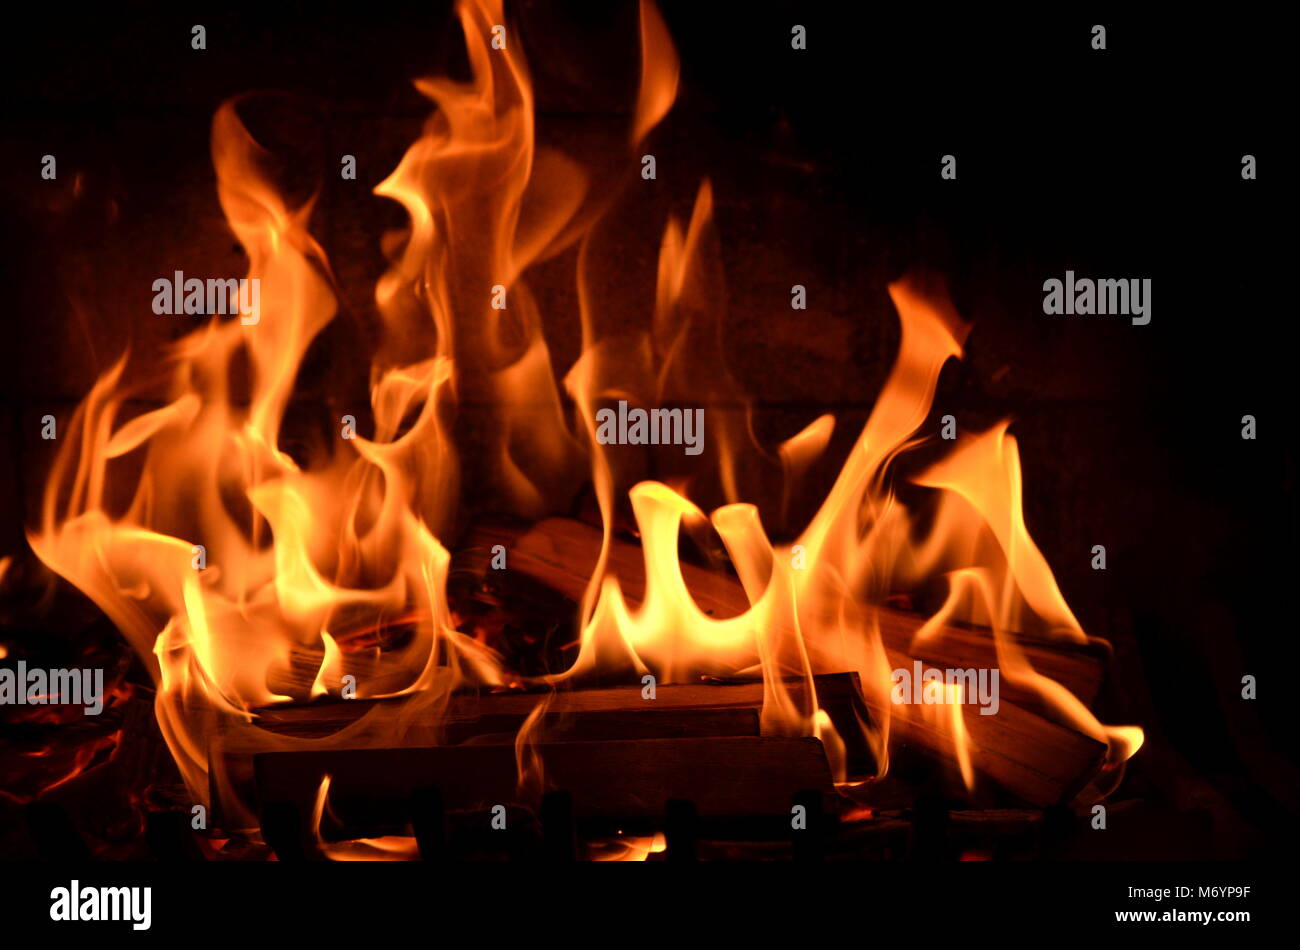 Close up of burning fire with blazing red, orange and yellow flames  background. Fire hazard, fire safety, arson, inferno, danger and house fire  theme Stock Photo - Alamy